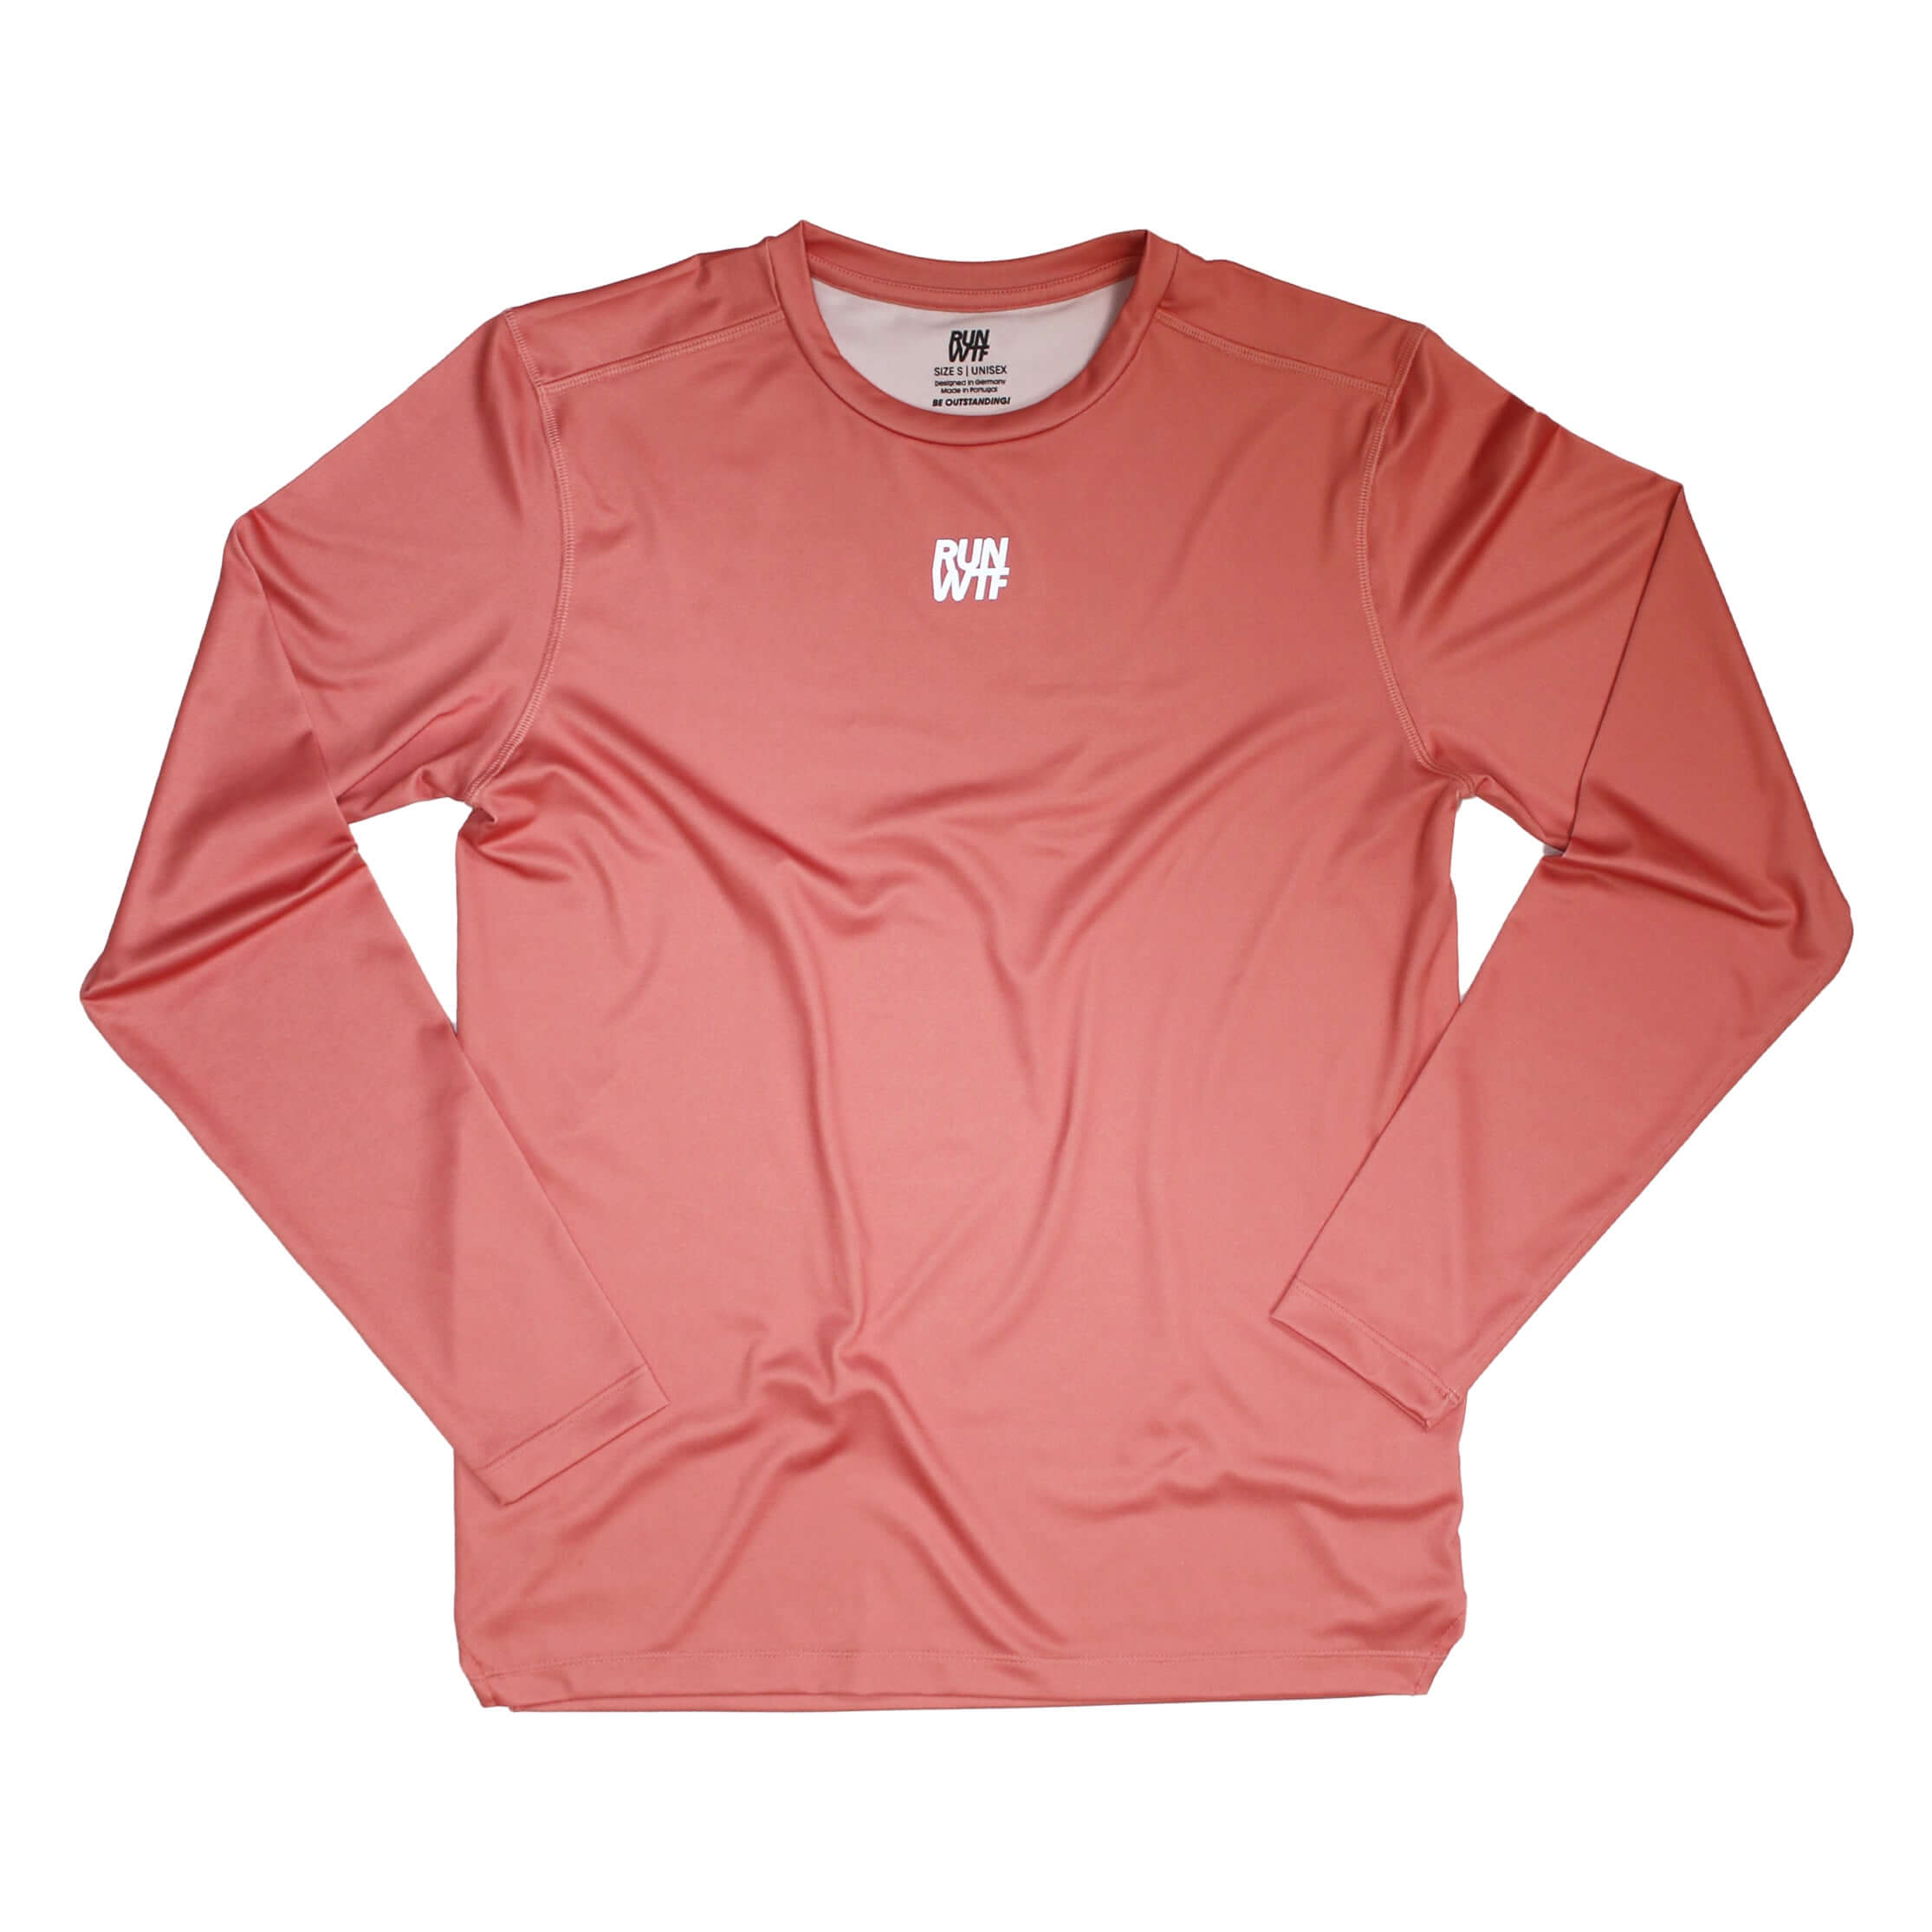 Running Longsleeve for training or racing in cold condition. Lightweight and moisture-wicking made from Recycling Polyester.